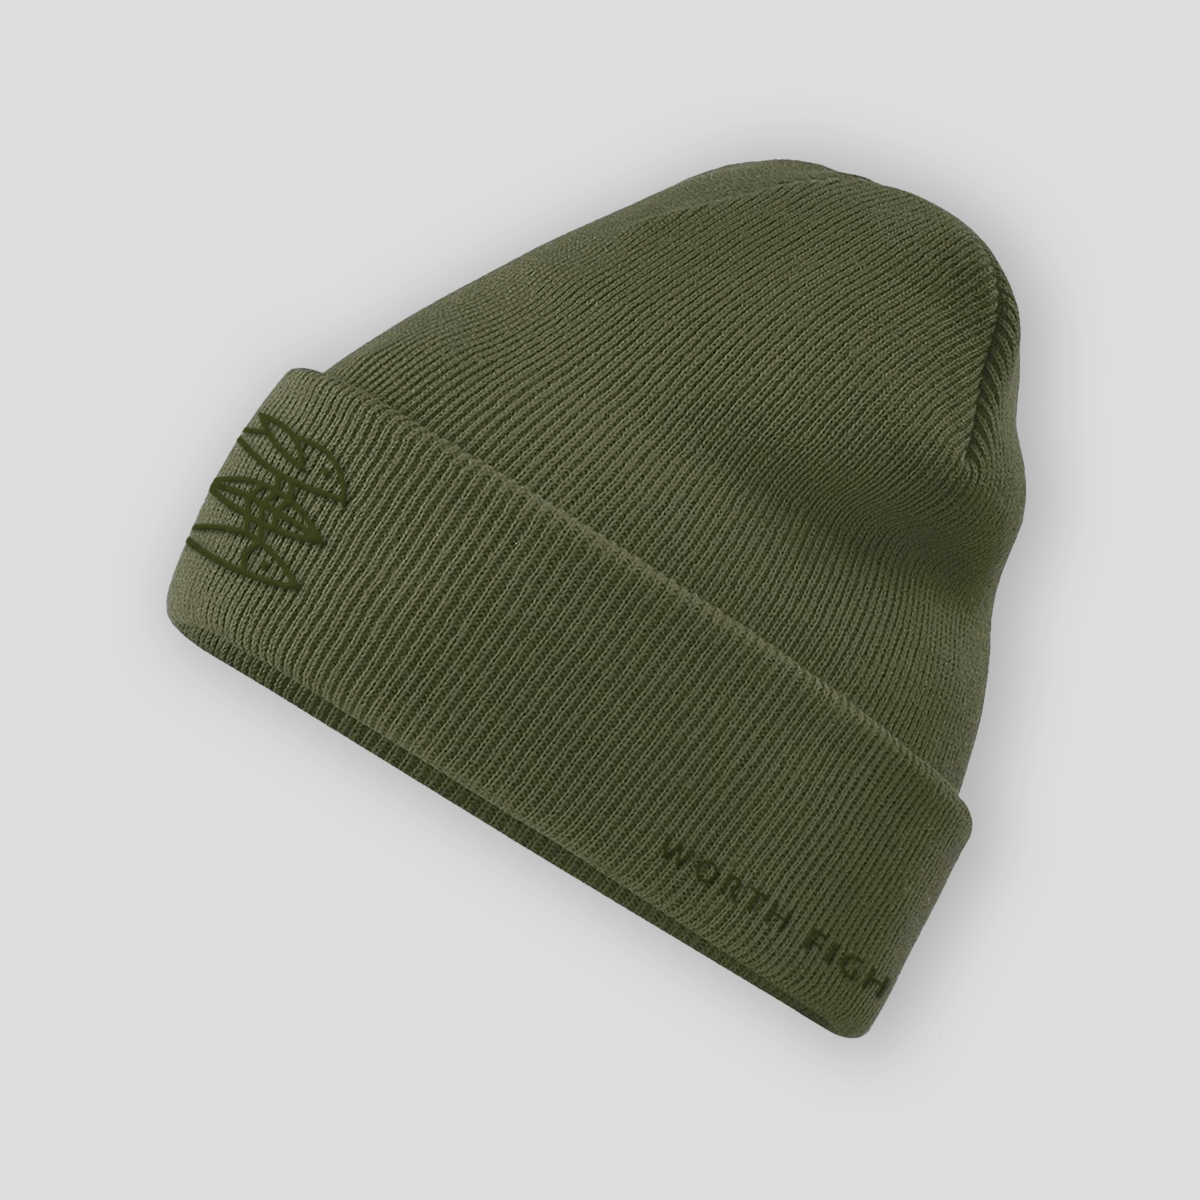 Beanie "Worth fighting for" Oliv